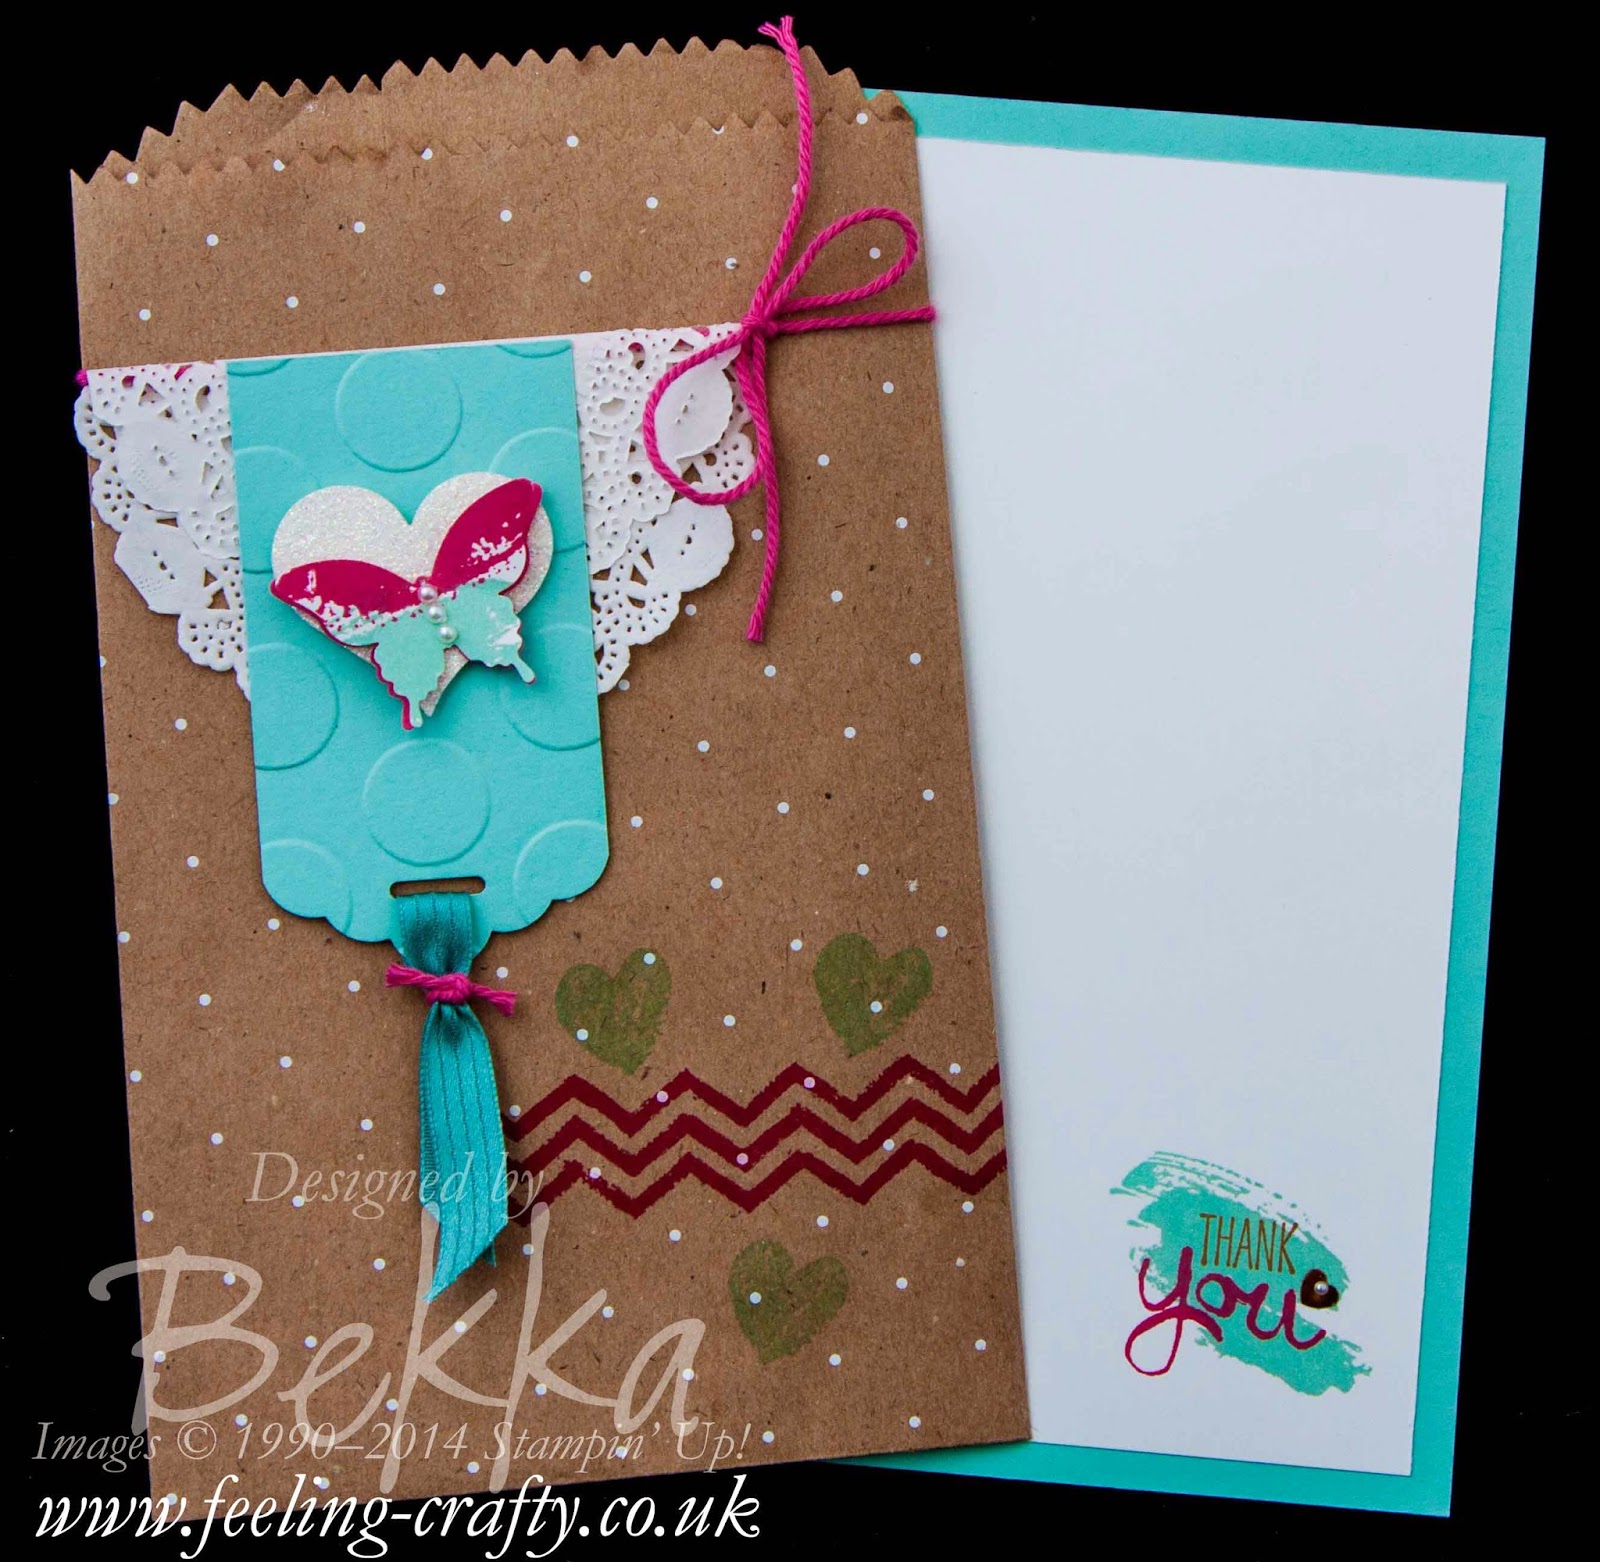 A Special Work of Art Thank You Card made using Stampin' Up! Supplies bu UK Independent Demonstrator Bekka Prideaux